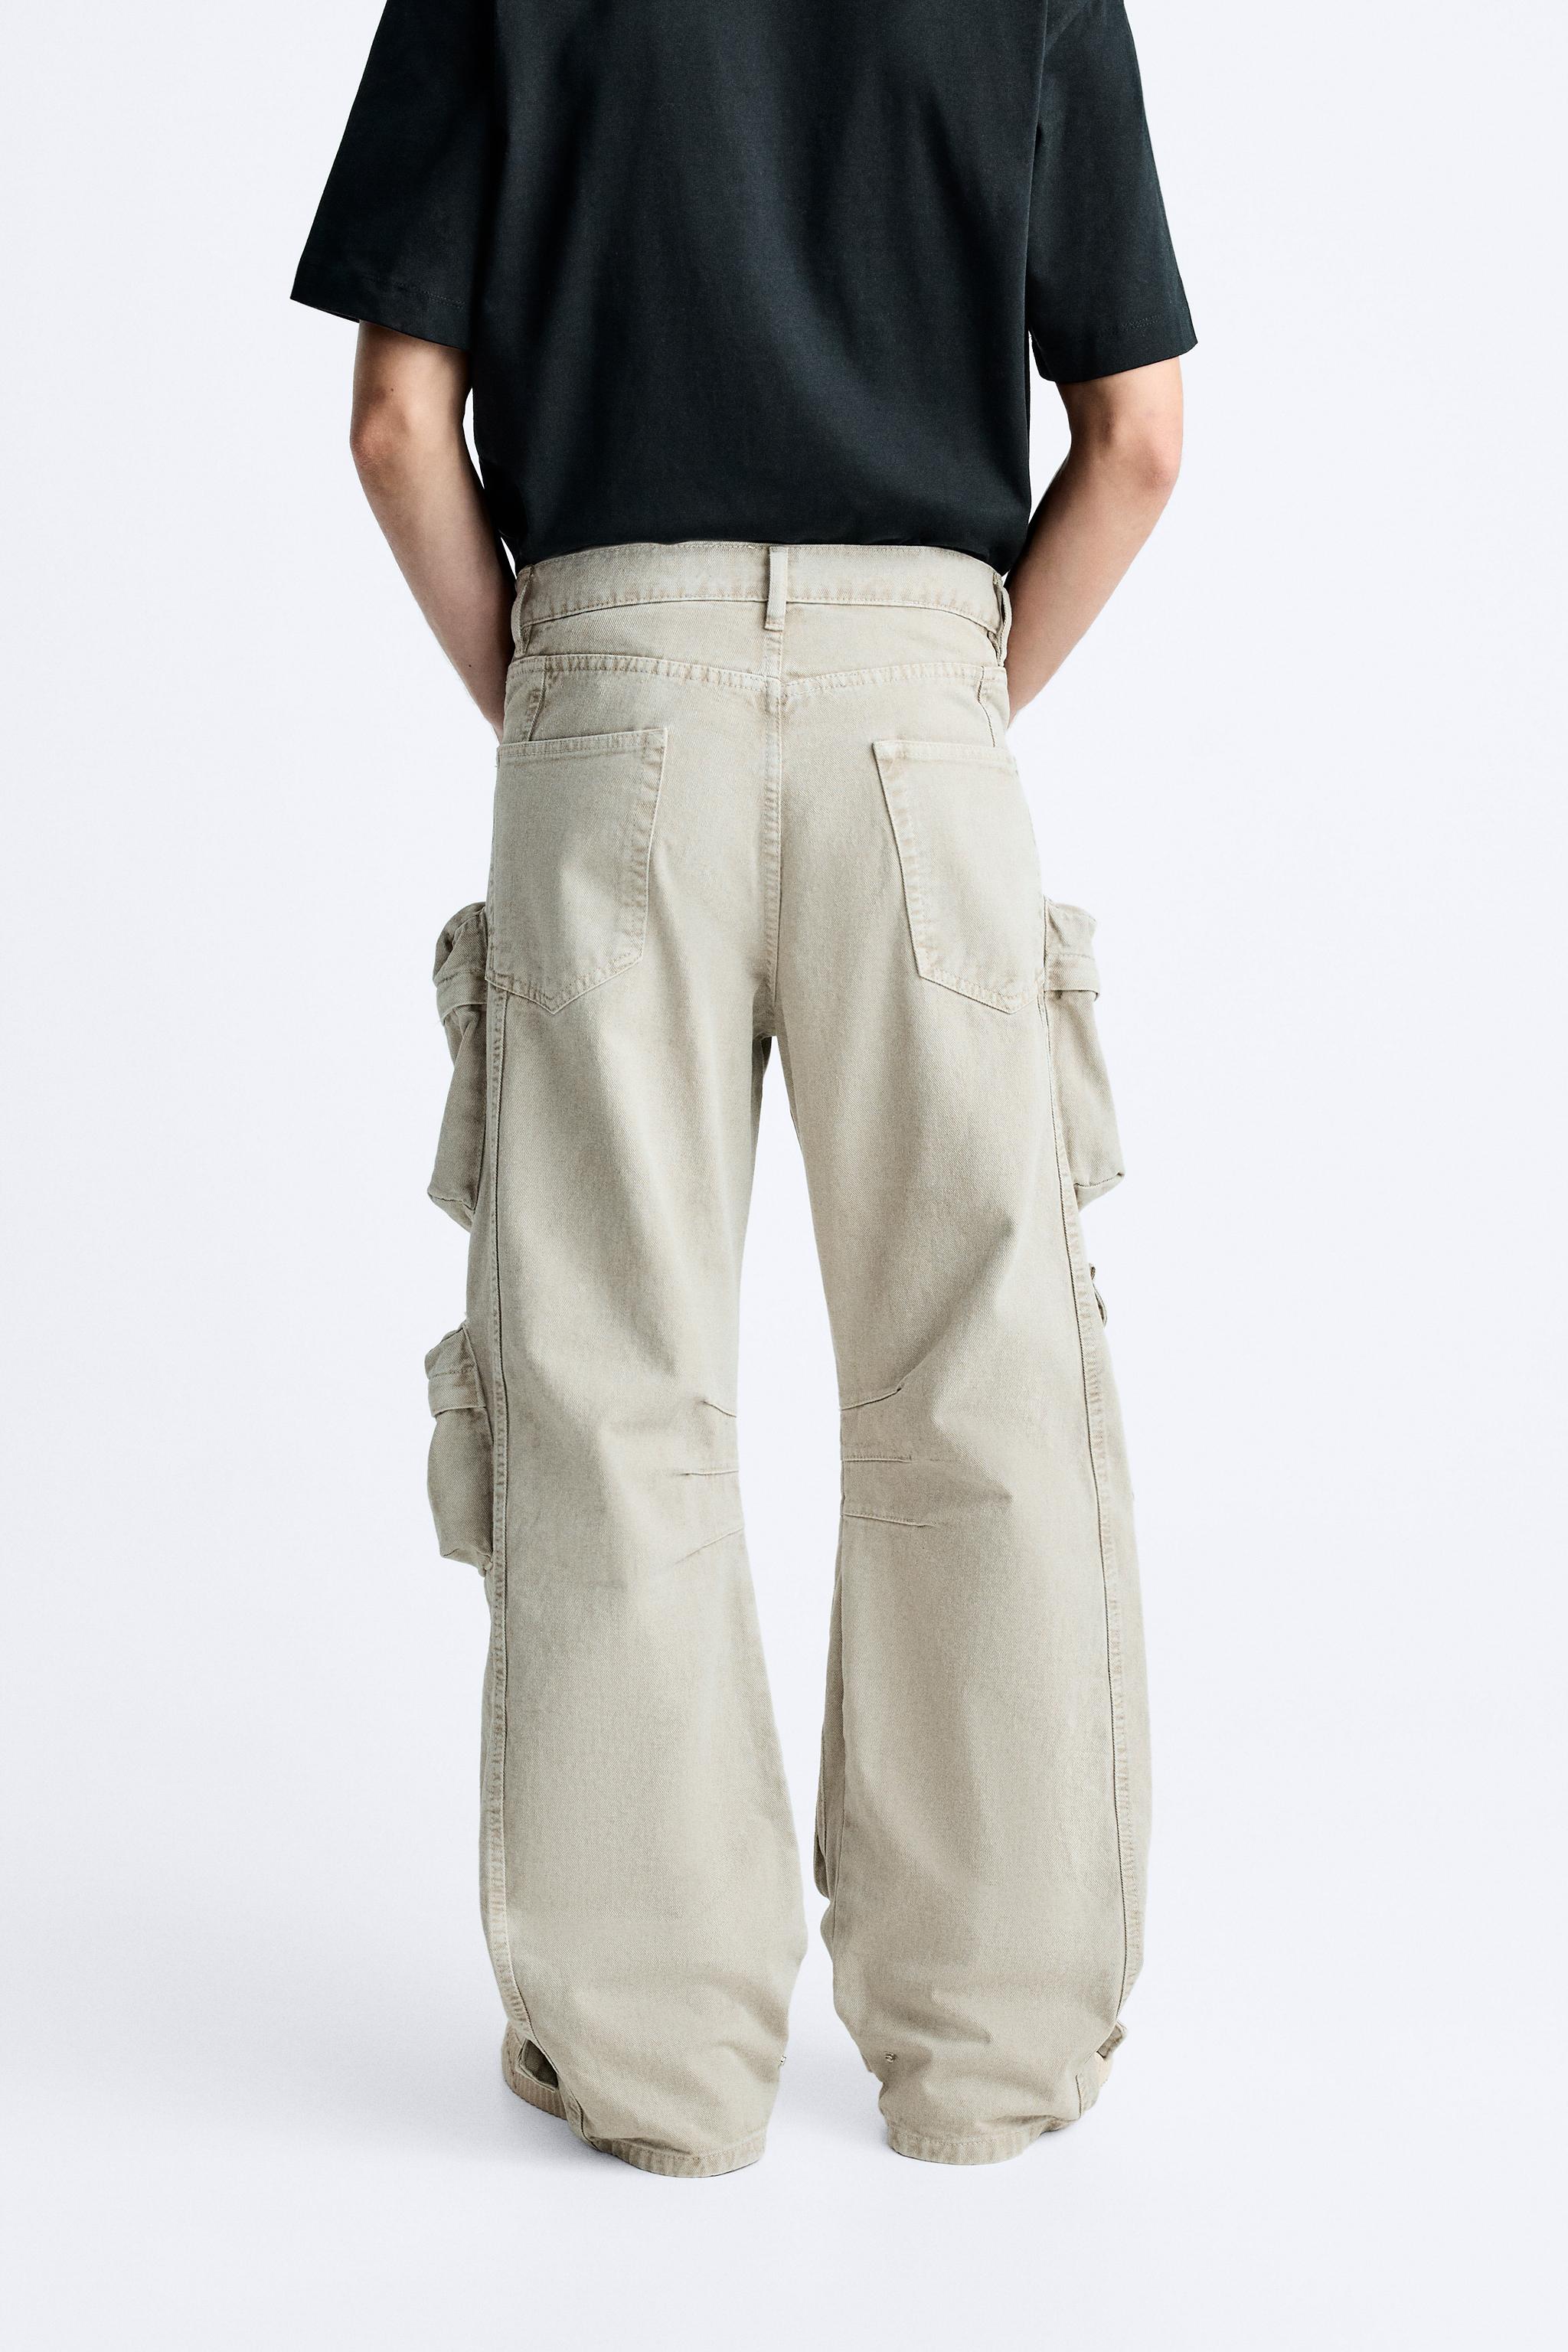 Studio Collection Cross Front Pant